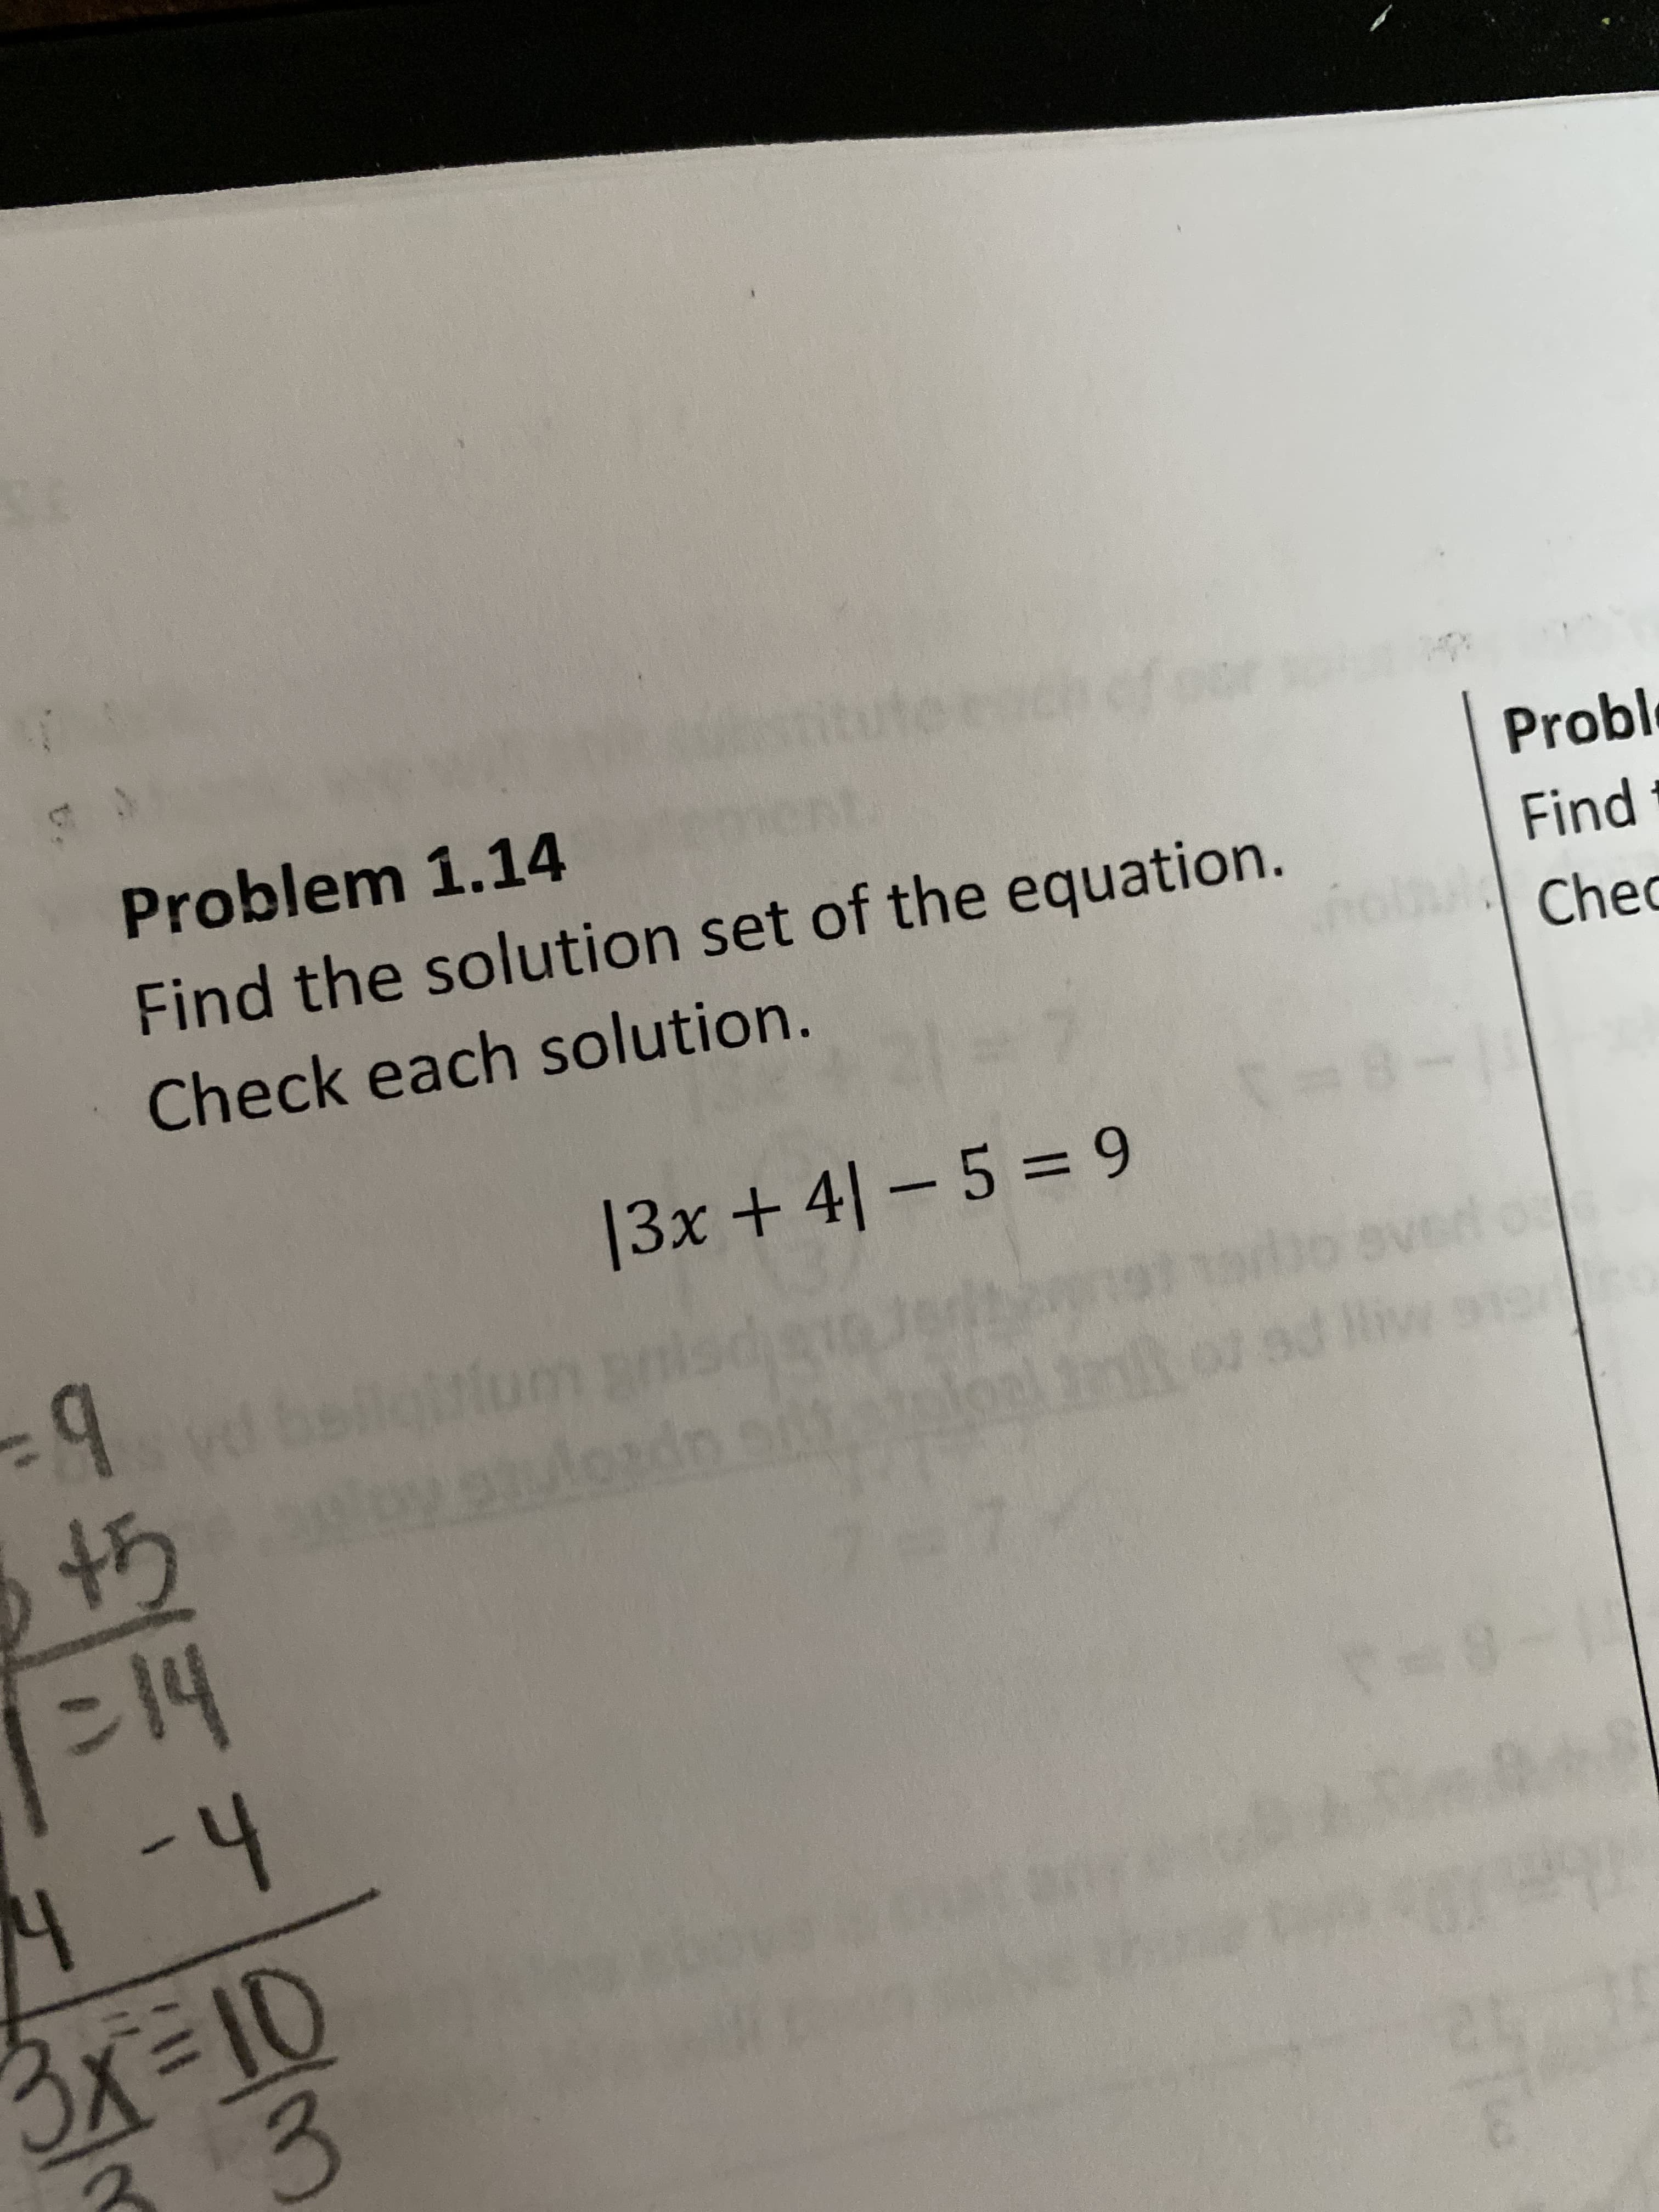 Problem 1.14
Proble
Find the solution set of the equation.
Find
Check each solution.
Chec
|3x +4|-
-5%= 9
ls
lordn
wbo ever
t5
14
4-4
3X3D10
ad iiw 919
7-7
